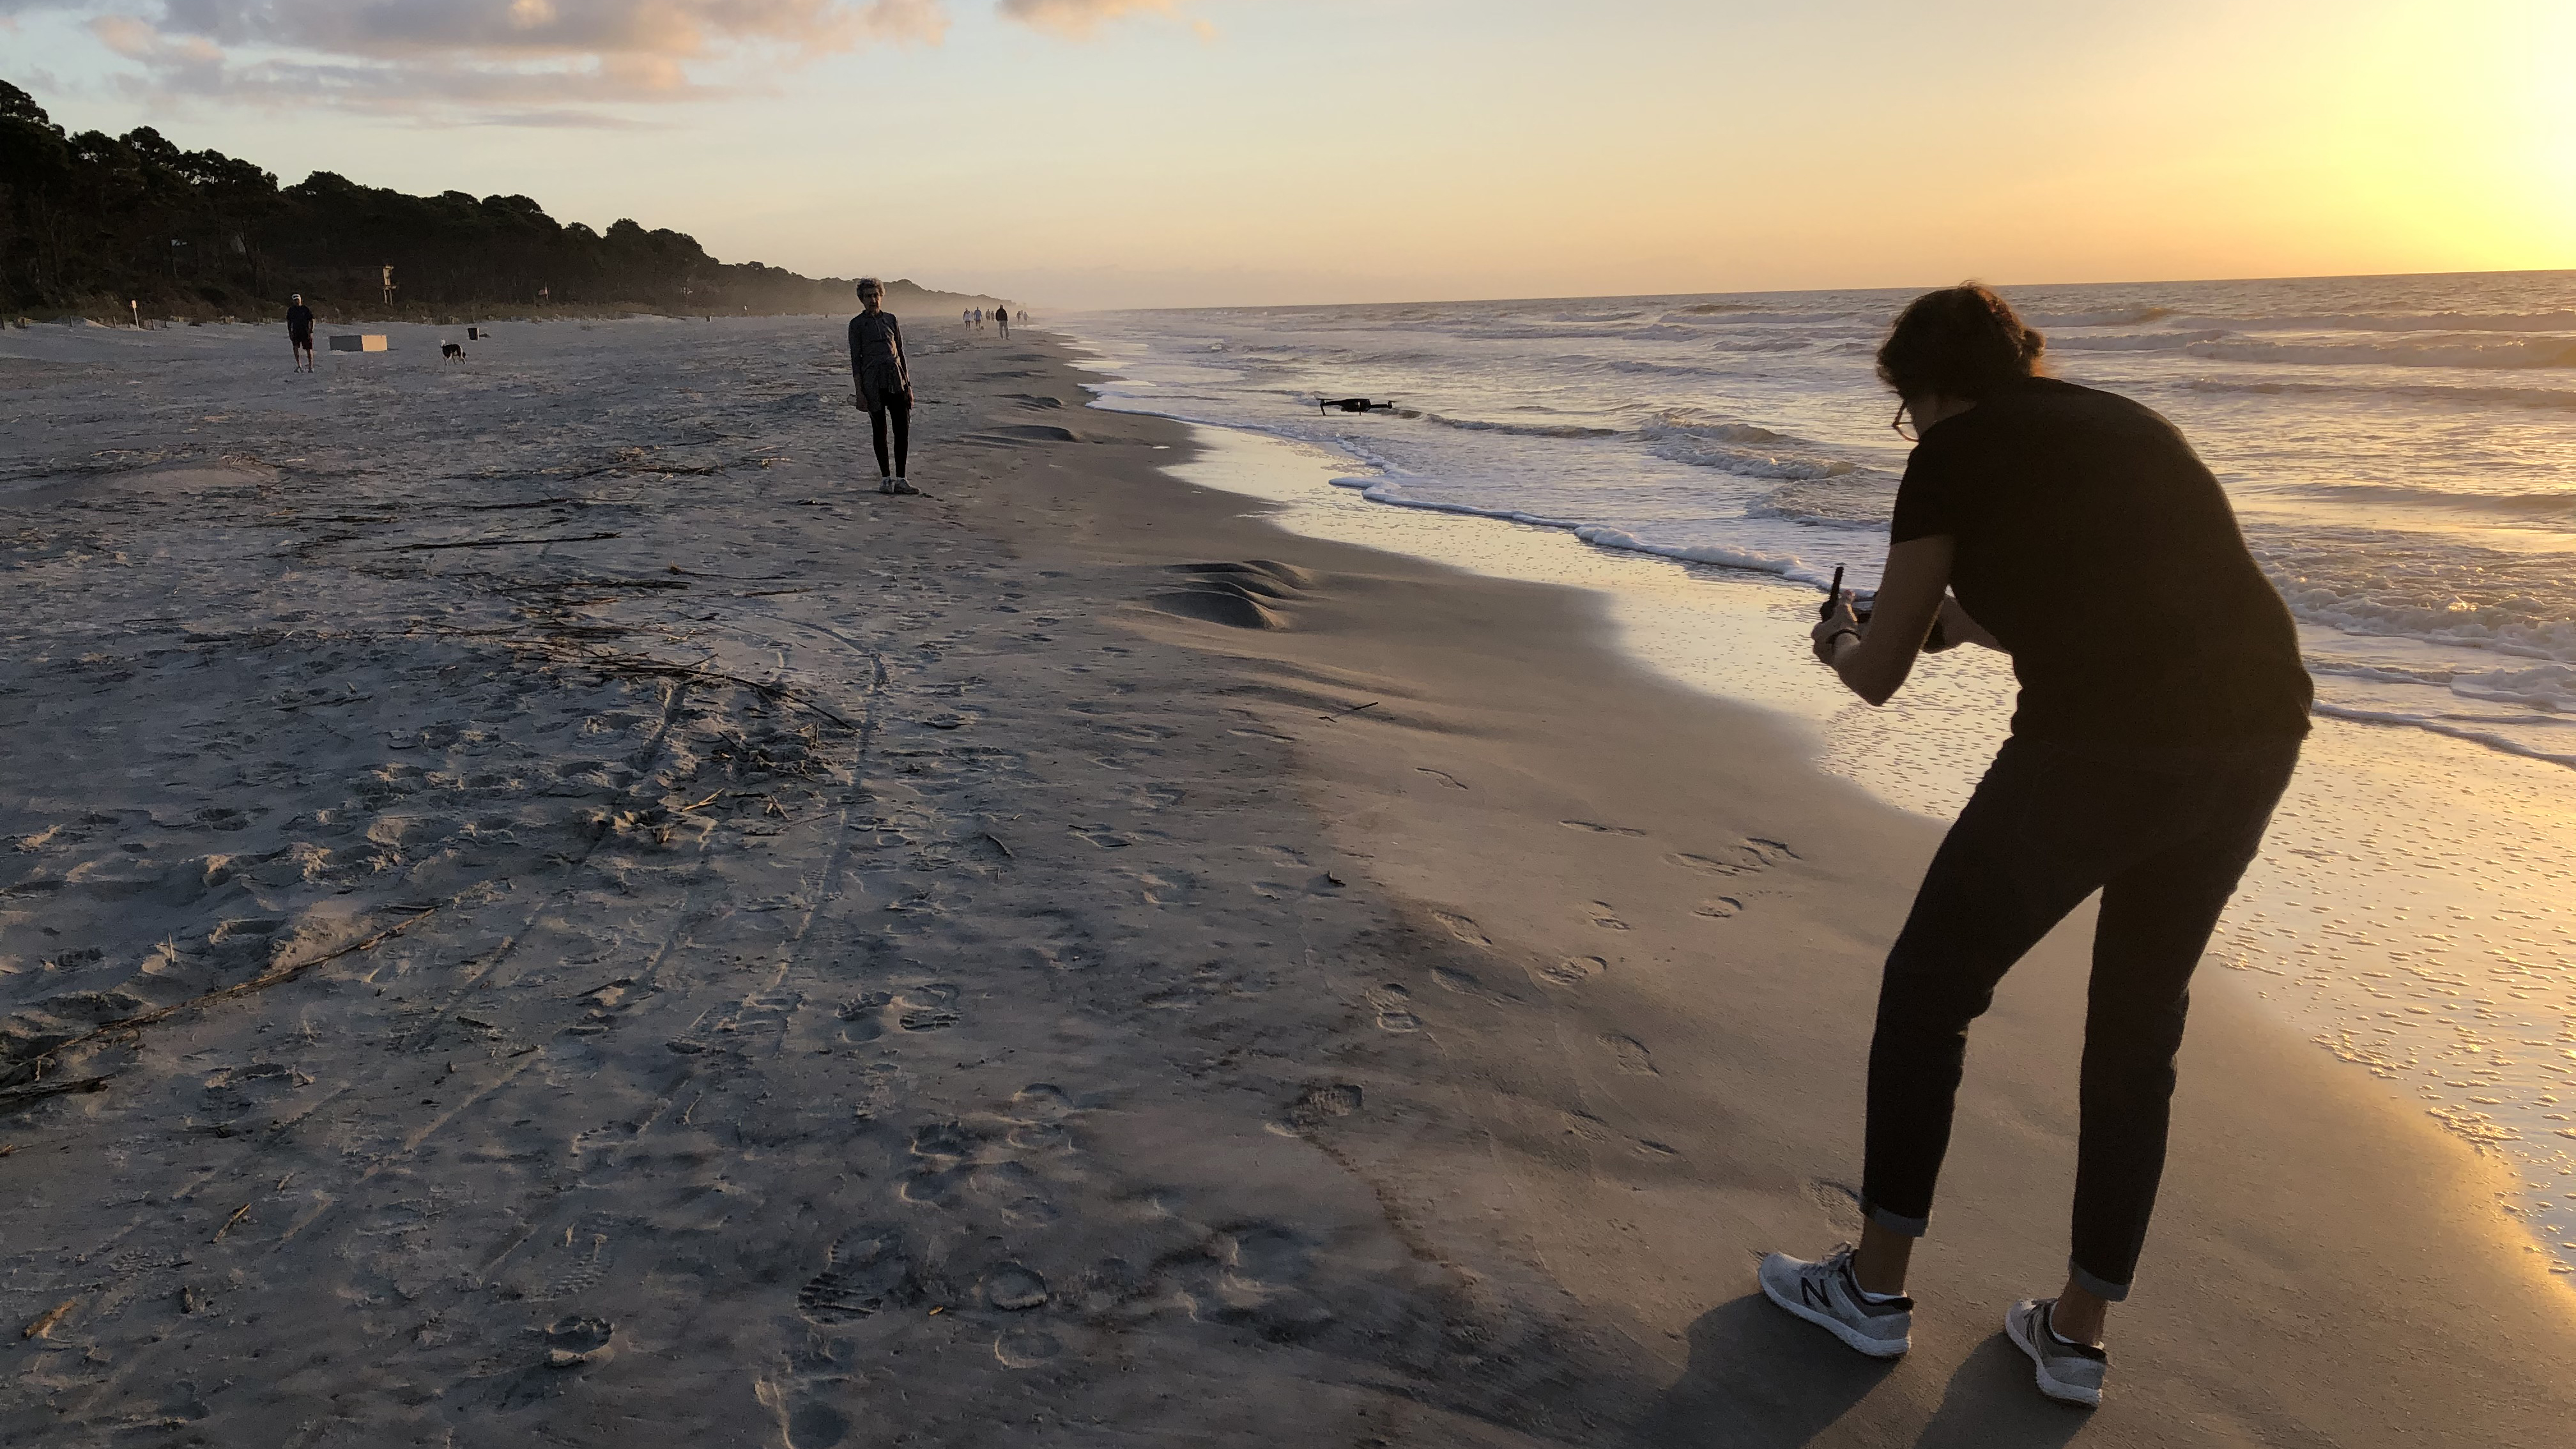 A behind-the-scenes shot of videographer Simone Keith filming Aldwyth on the beach near her Lowcountry South Carolina home. (Photo credit: Olympia Stone)